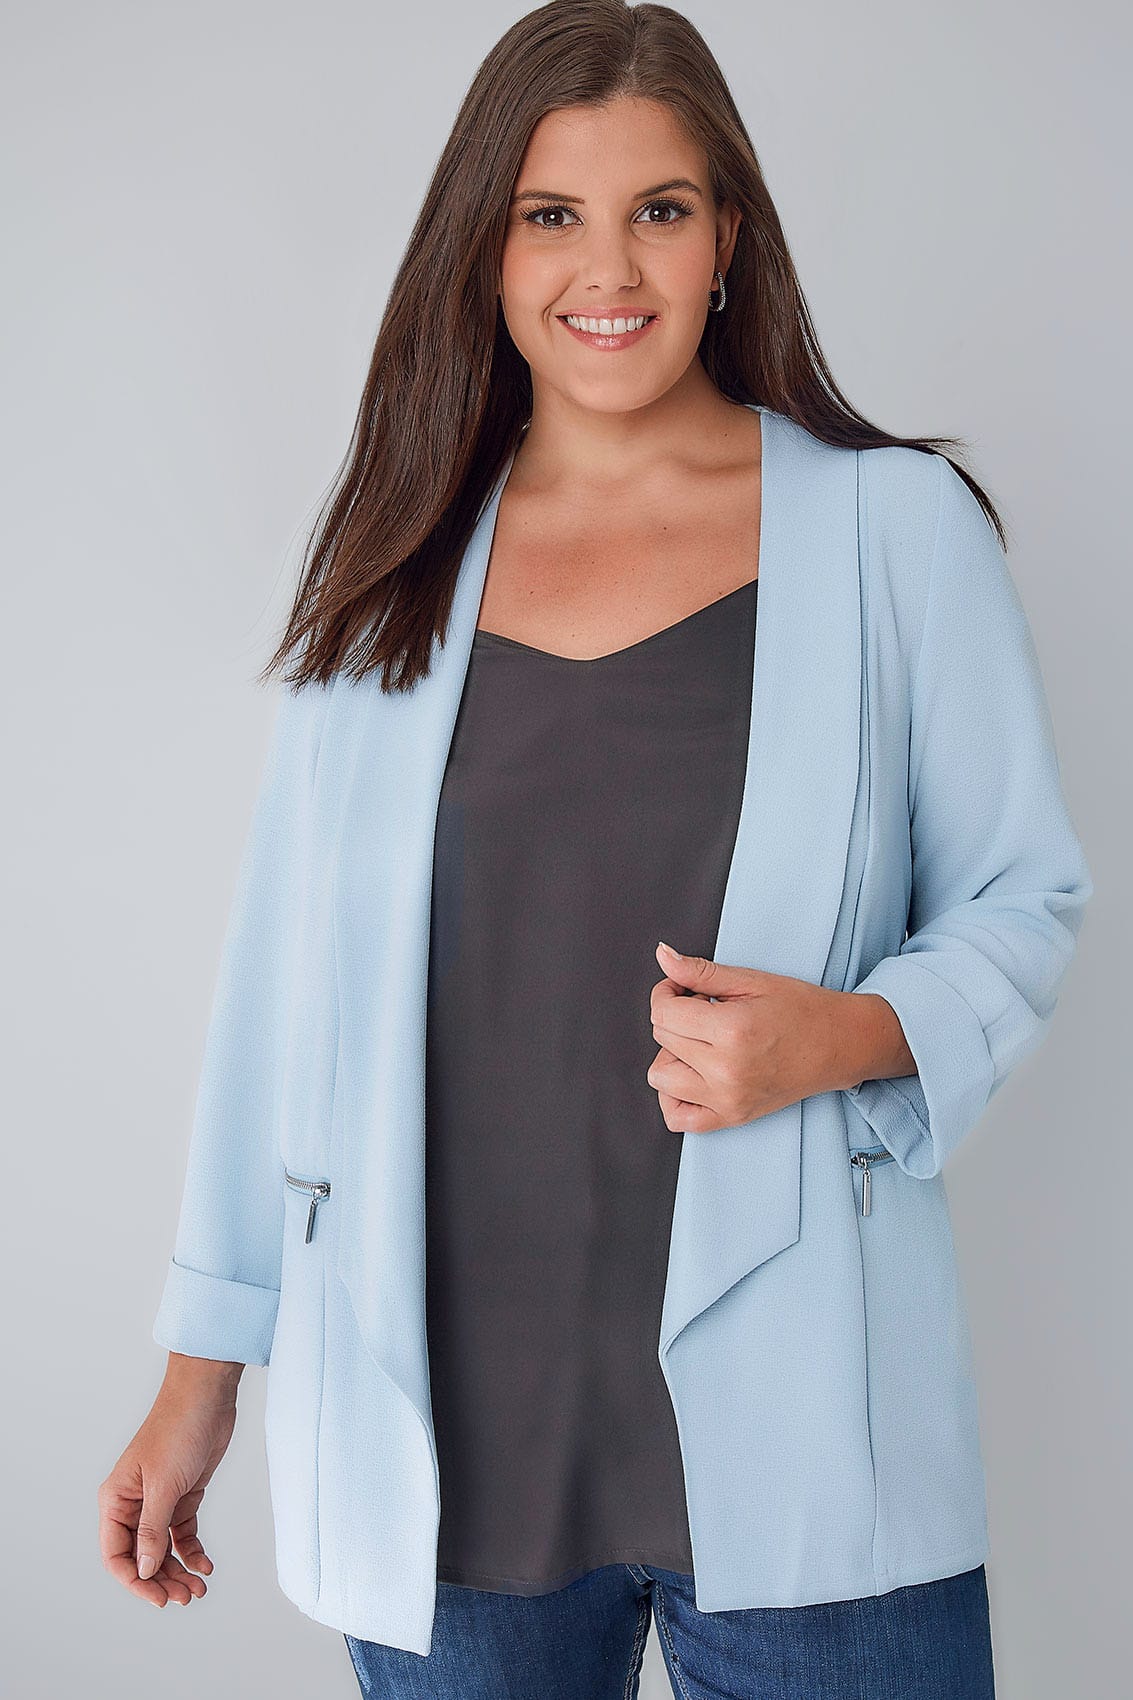 Powder Blue Bubble Crepe Jacket With Zip Pockets, Plus size 16 to 36